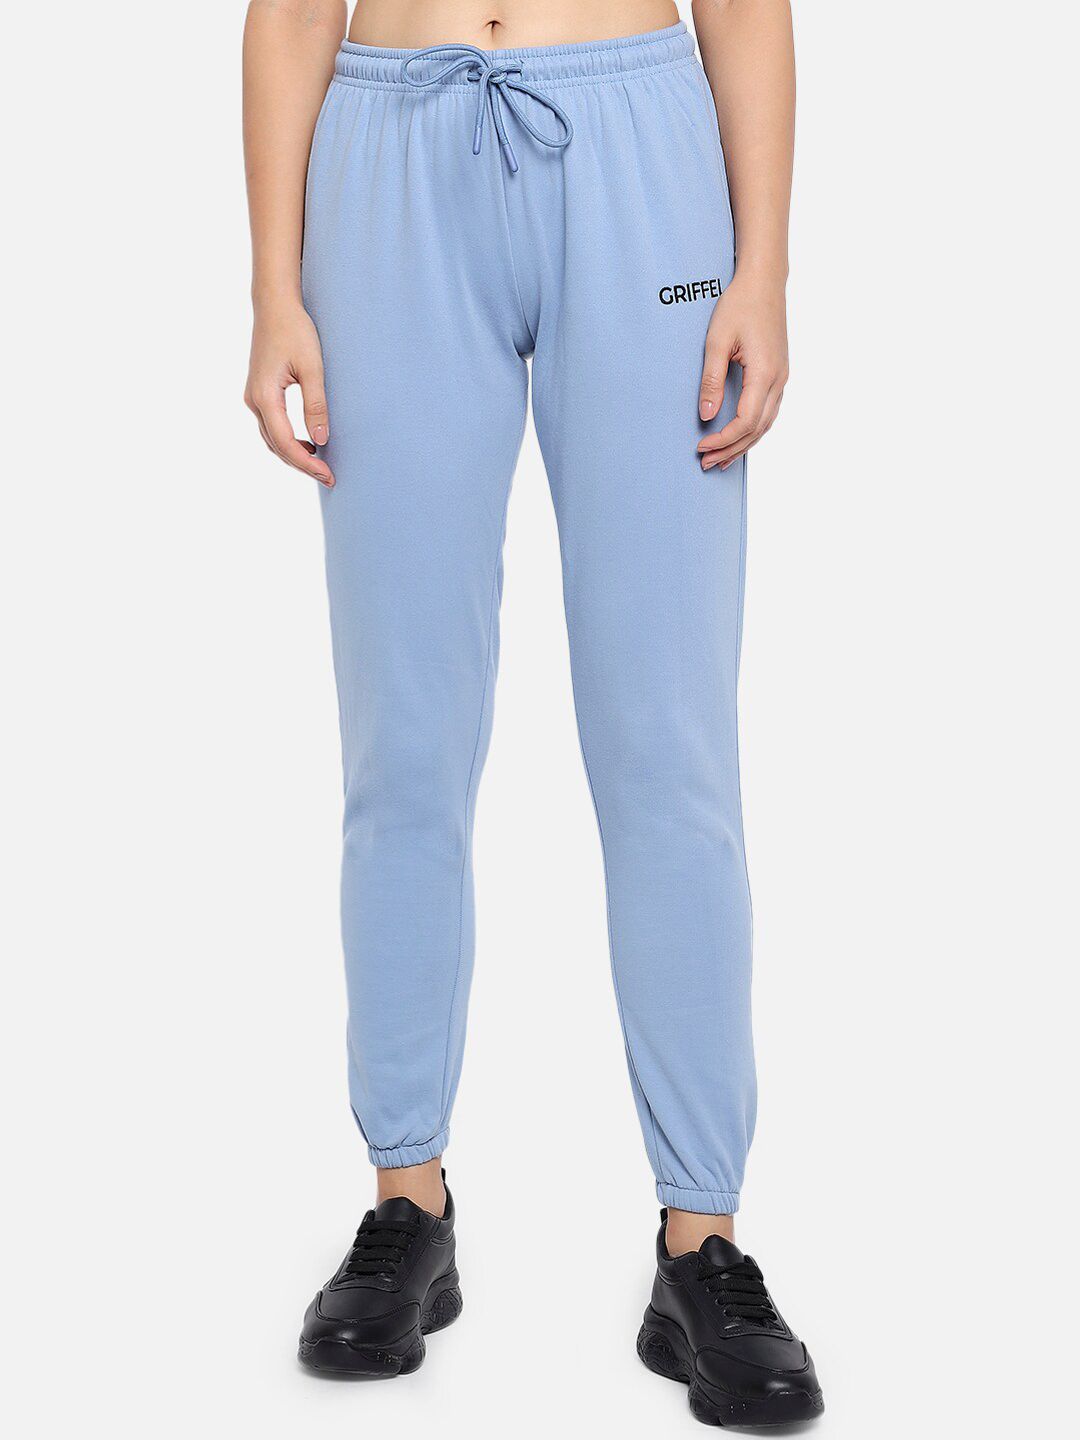 GRIFFEL Women Blue Solid Cotton Track Pant Price in India